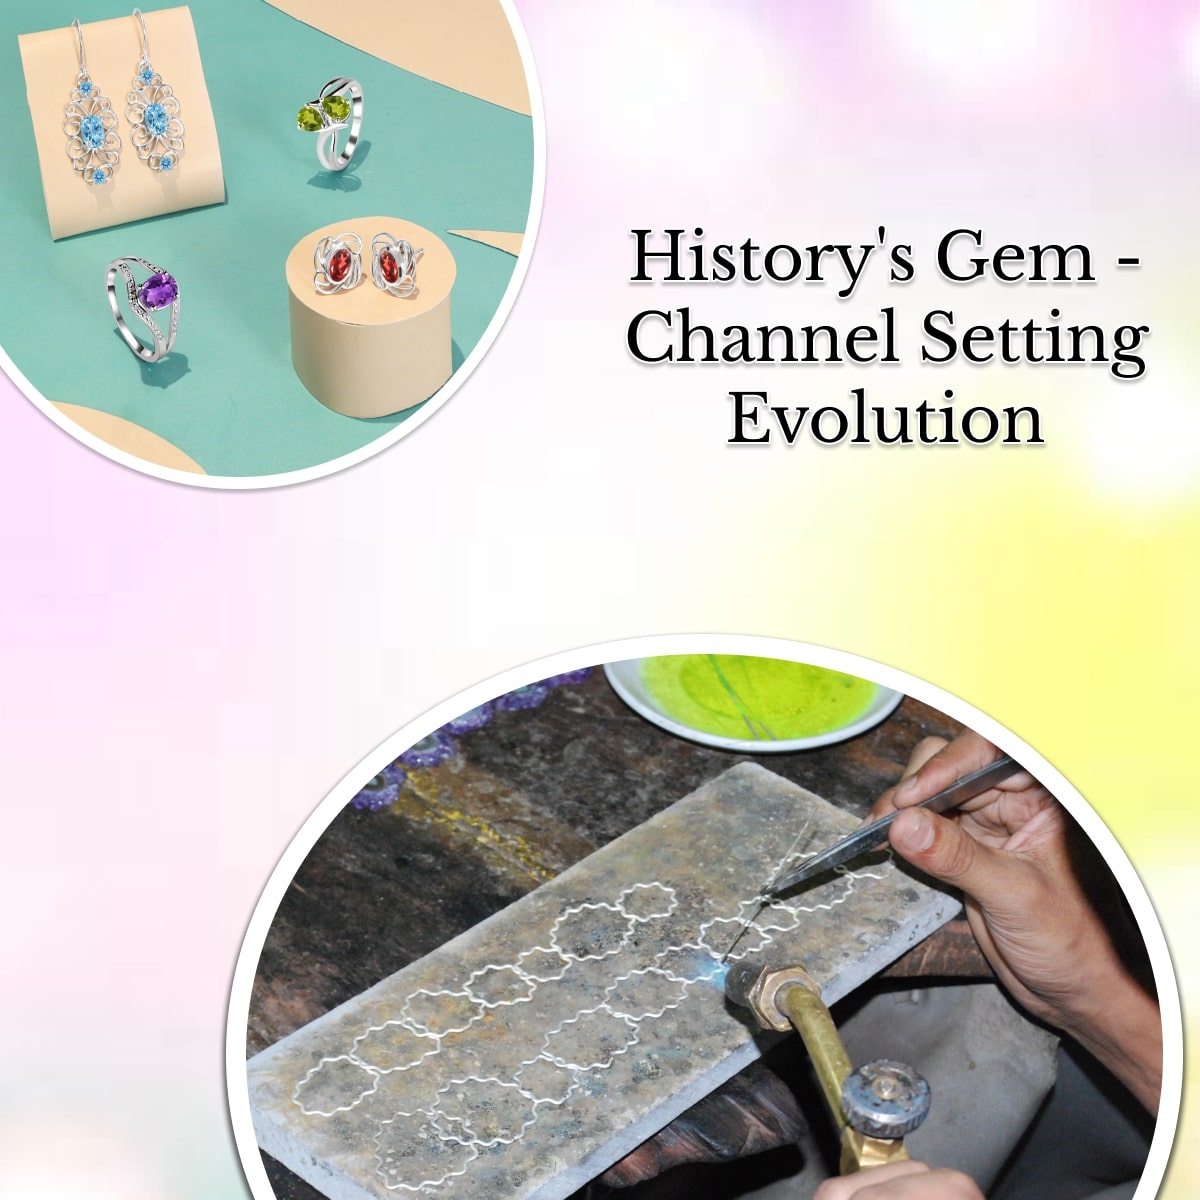 History and Evolution of Channel Setting